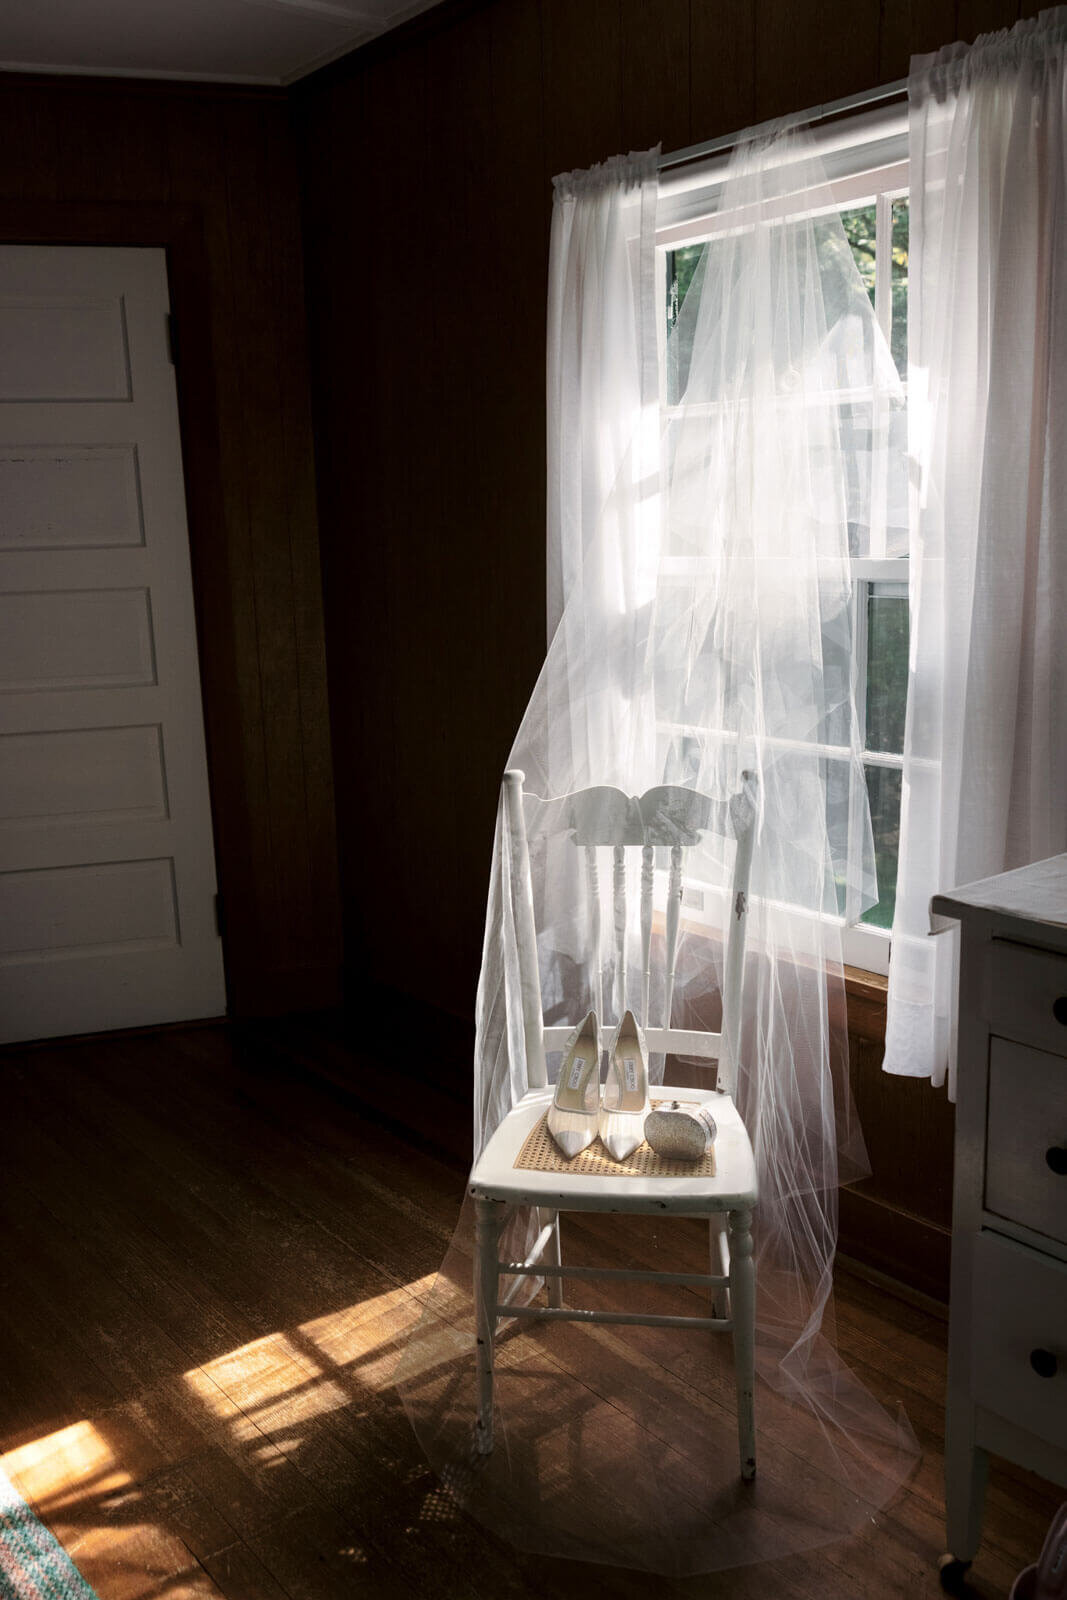 The bride's shoes and pouch are placed on a white chair covered by a white veil inside a room at The Ausable Club, New York.